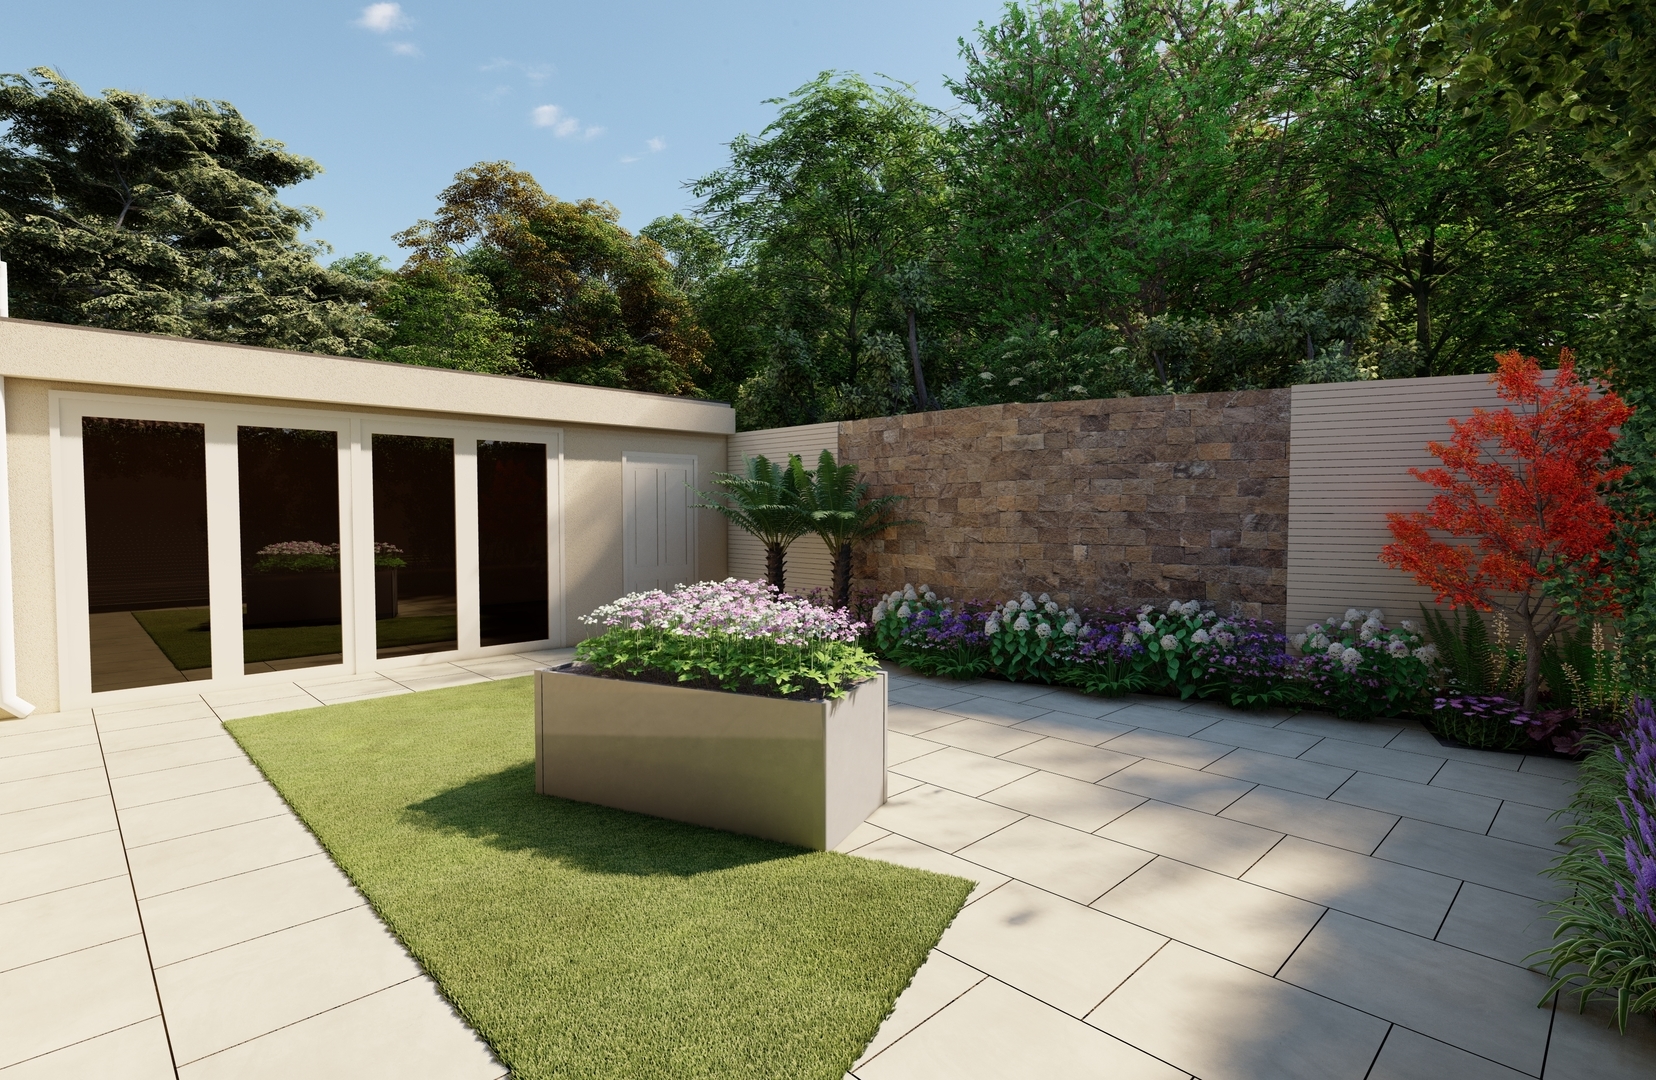 Garden Design for Family Garden in Glenageary, Co Dublin featuring Egyptian Limestone, Bespoke Horizontal Timber Slat Fencing, Natural Stone Wall Cladding, Mature Planting & Outdoor LED Garden Lighting